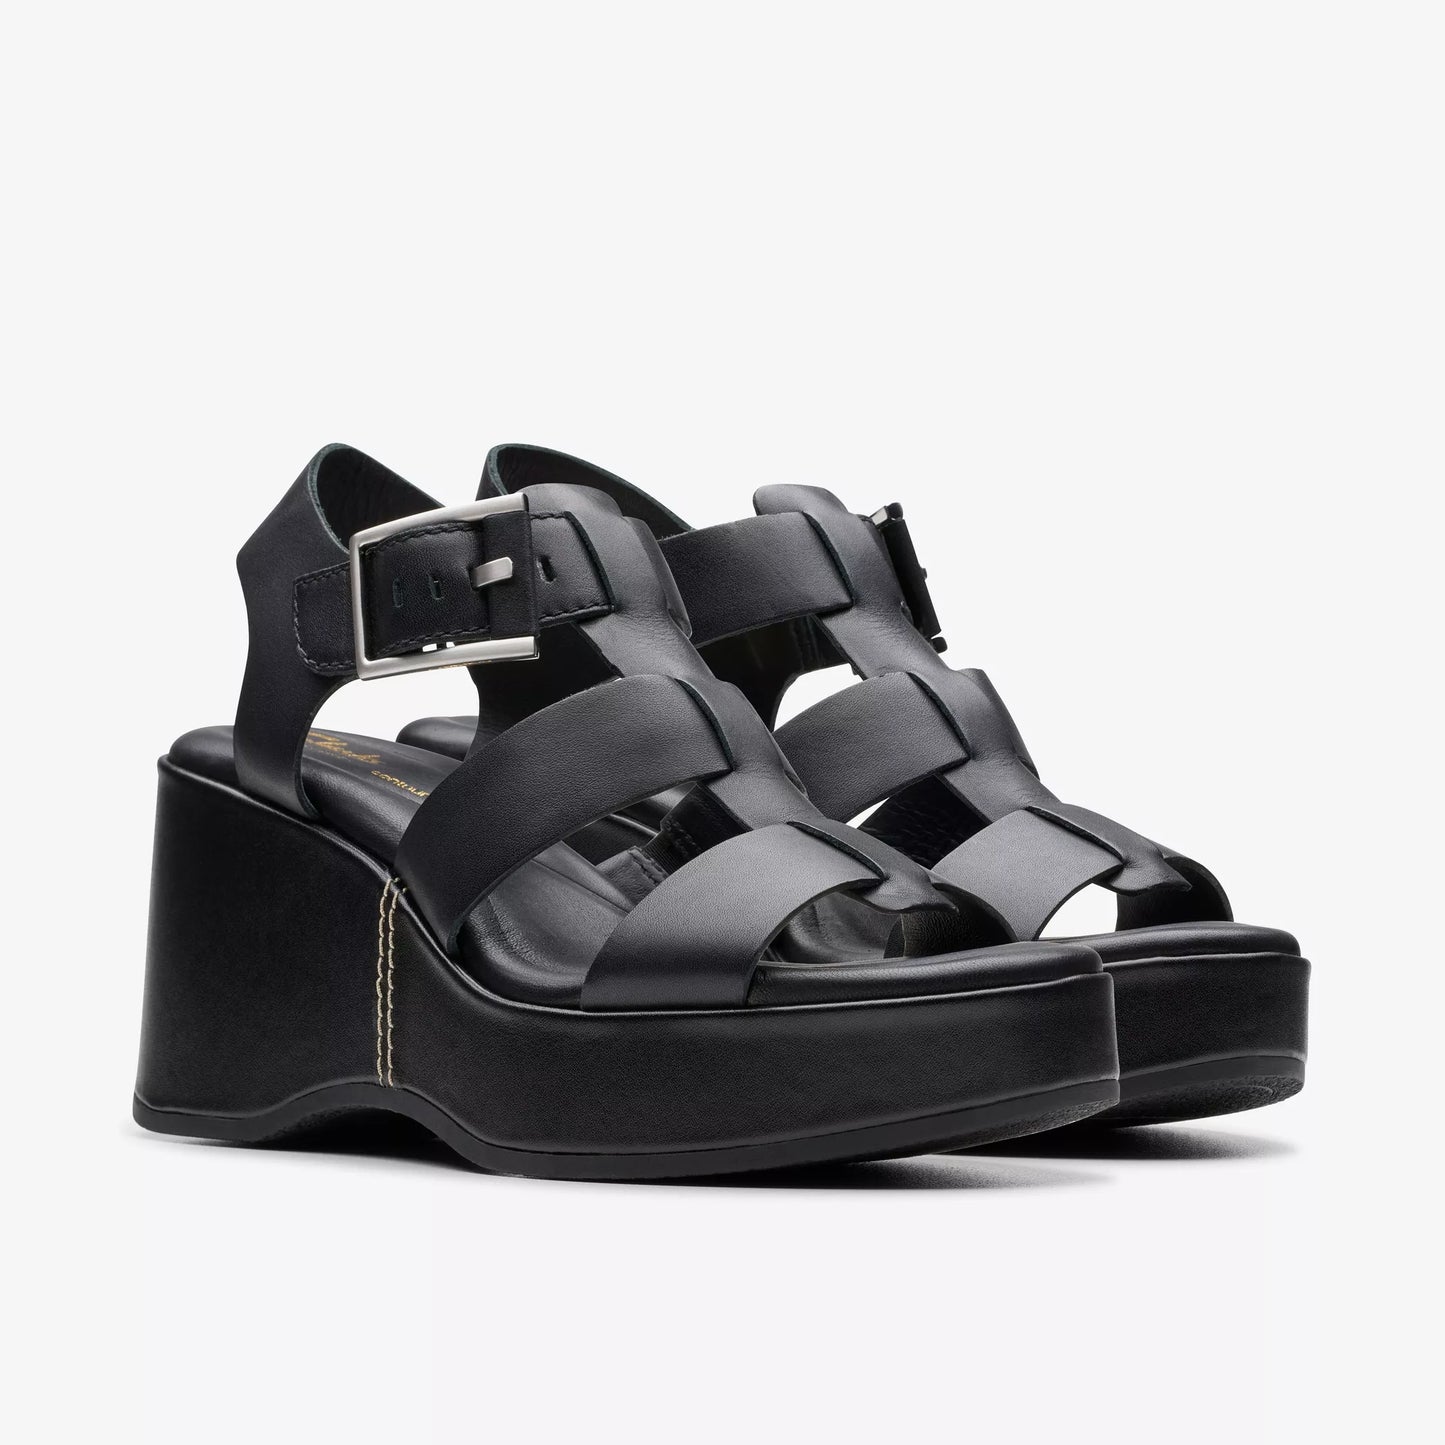 The black leather Manon Cove Wedge Sandals by Clarks